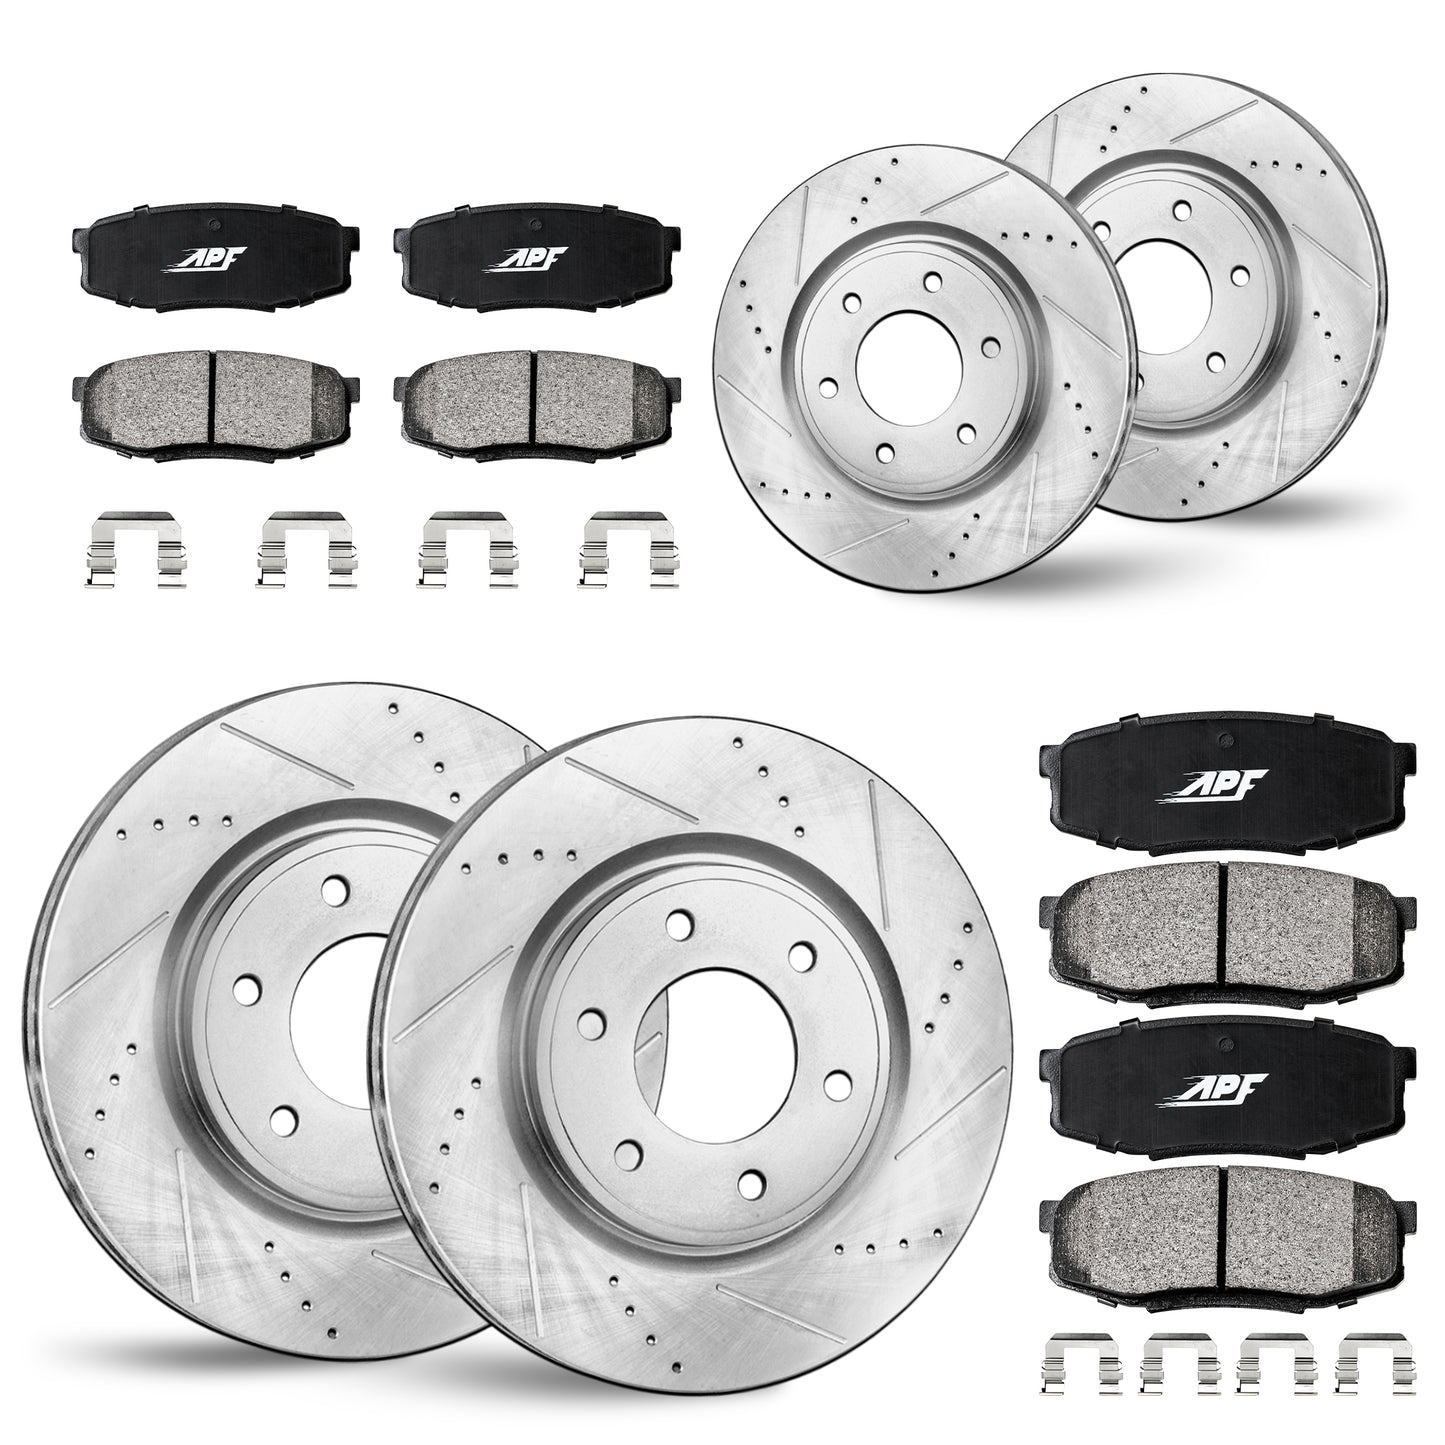 APF Full Kit compatible with Chevrolet Silverado 1500 2007 | Zinc Drilled Slotted Rotors with Ceramic Carbon Fiber Brake Pads